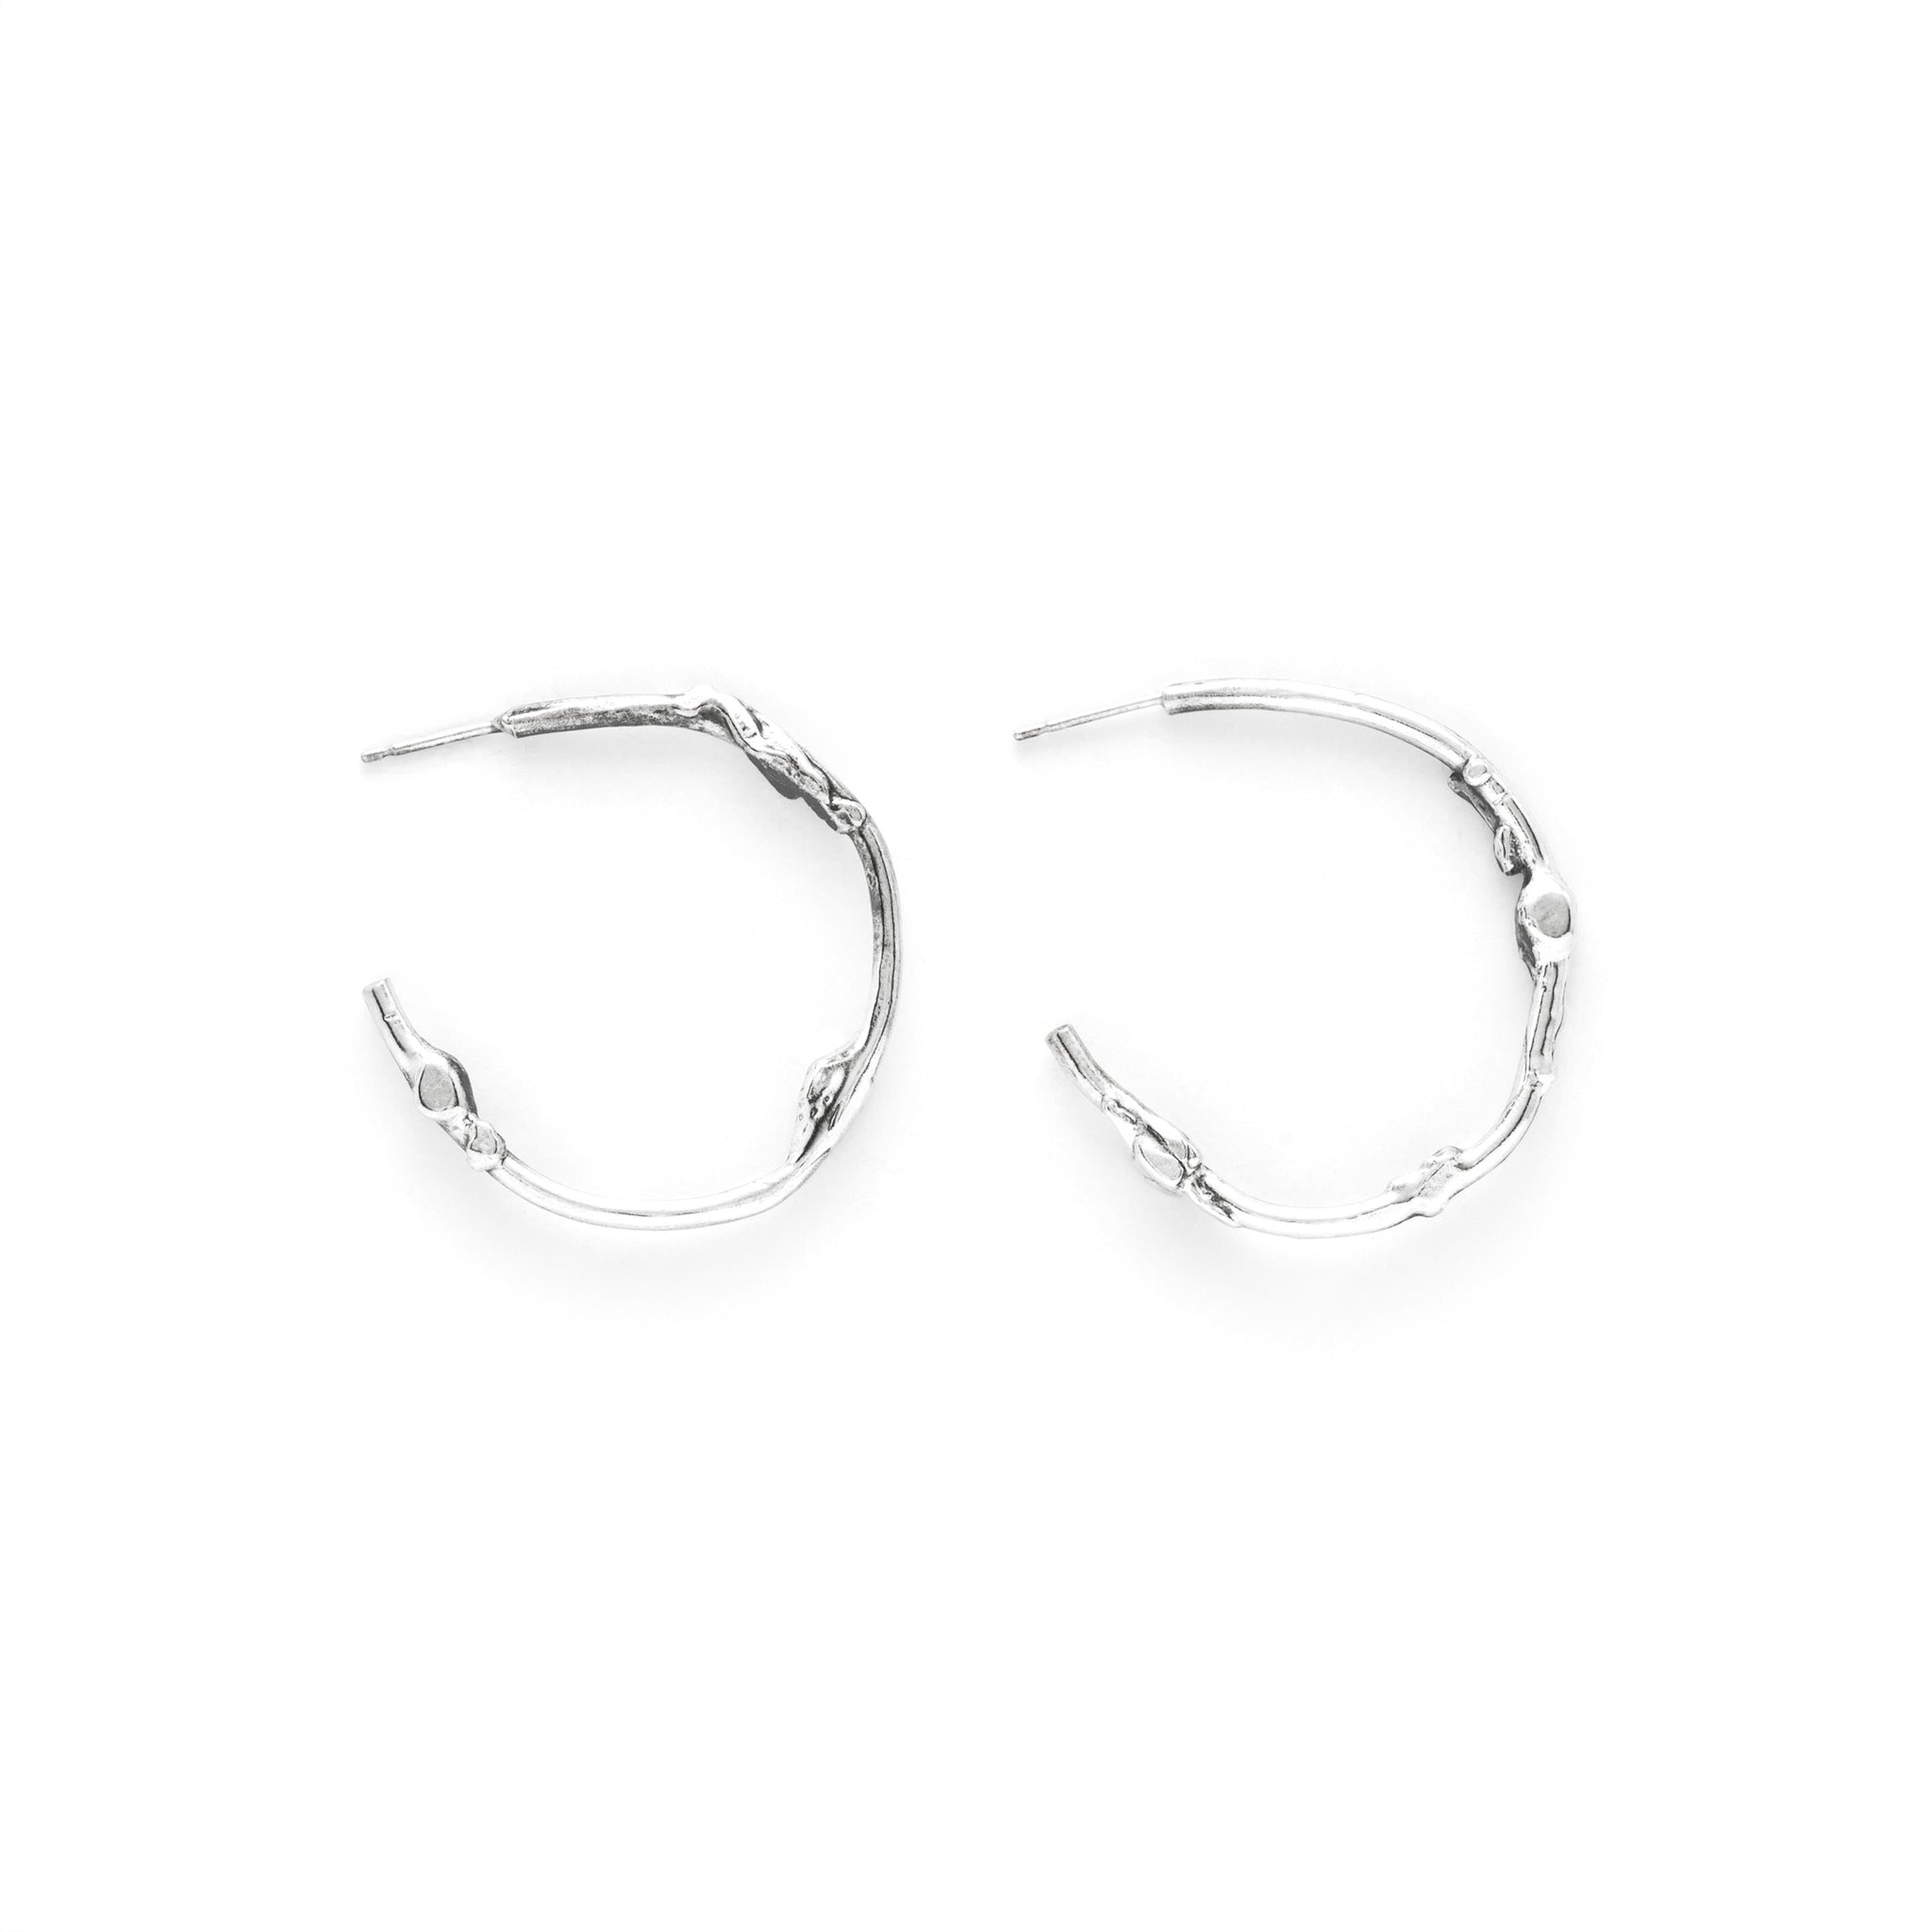 Cefalu Earrings in Silver by What If You Stayed Jewelry